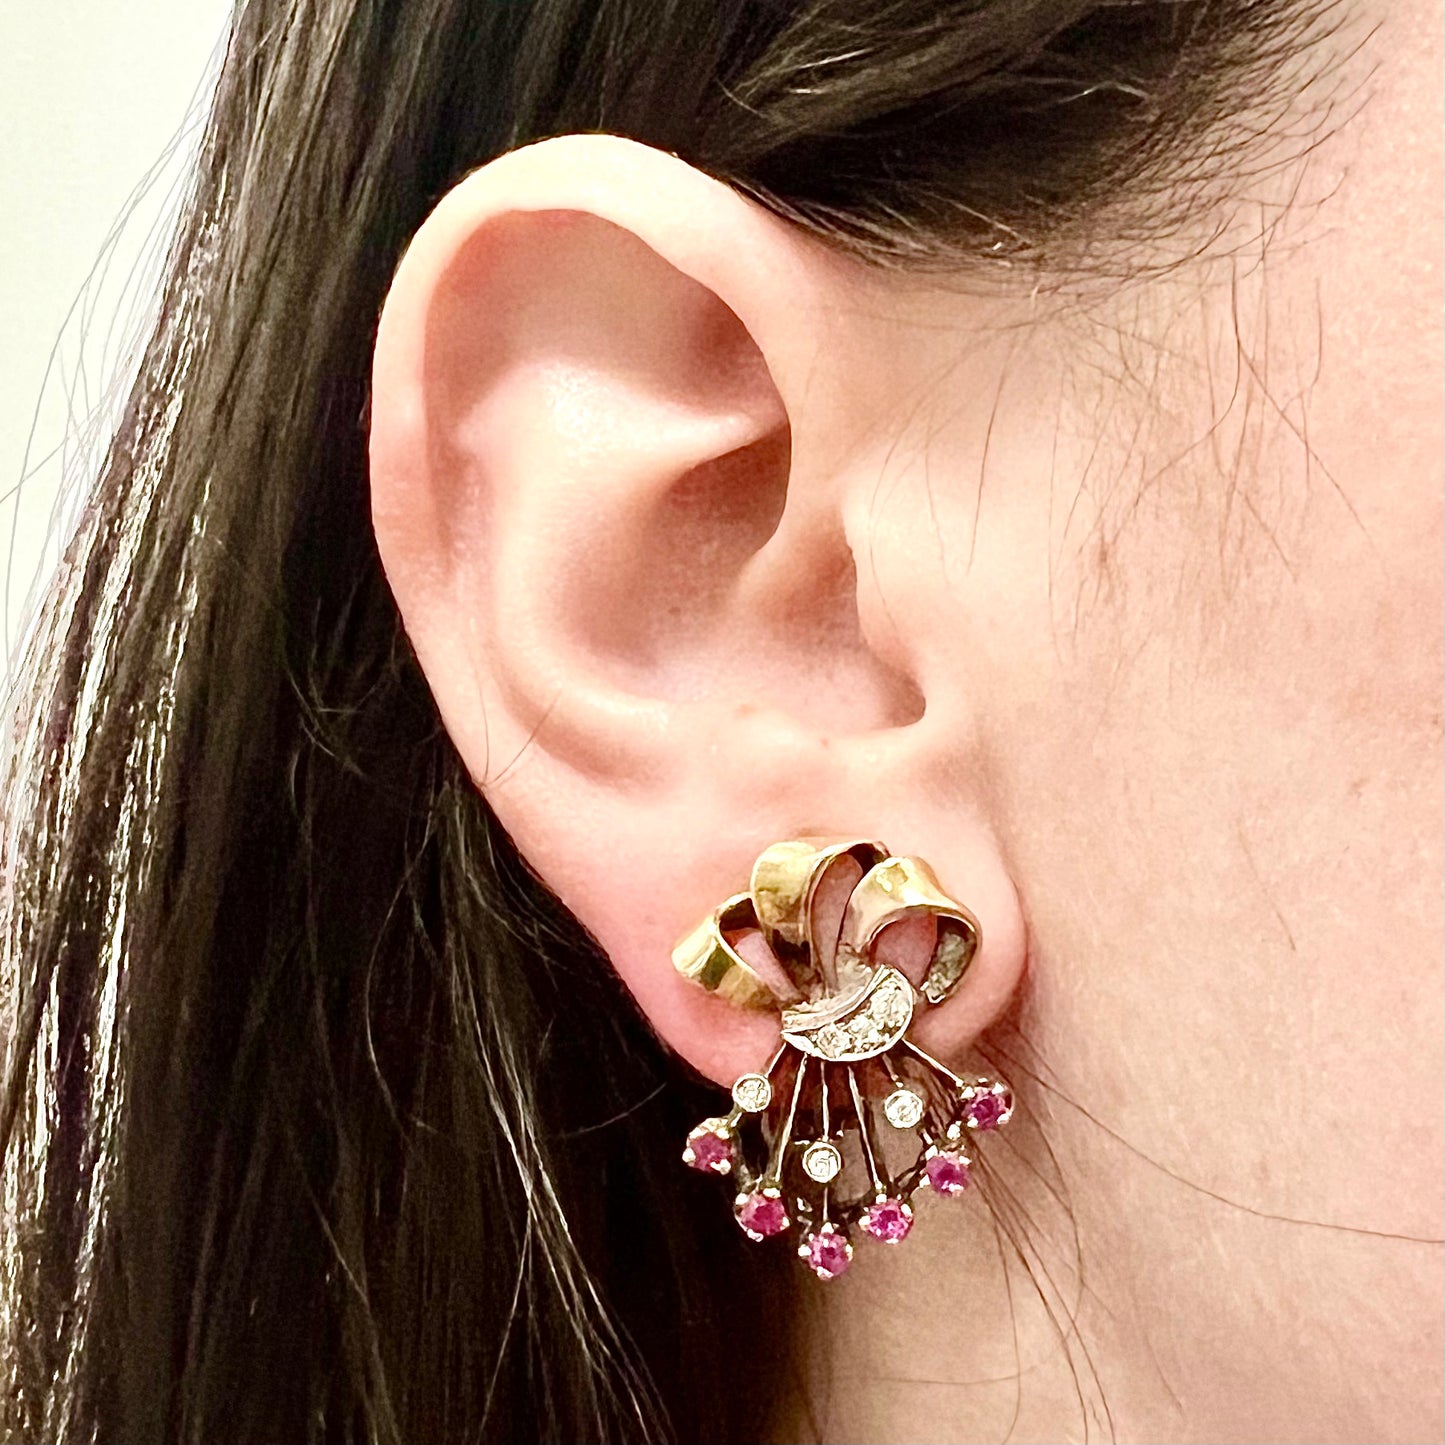 CLEARANCE 40% OFF - Vintage 1940’s Retro 14 Karat Two-Tone Gold Synthetic Ruby & Diamond Clip-On Earrings